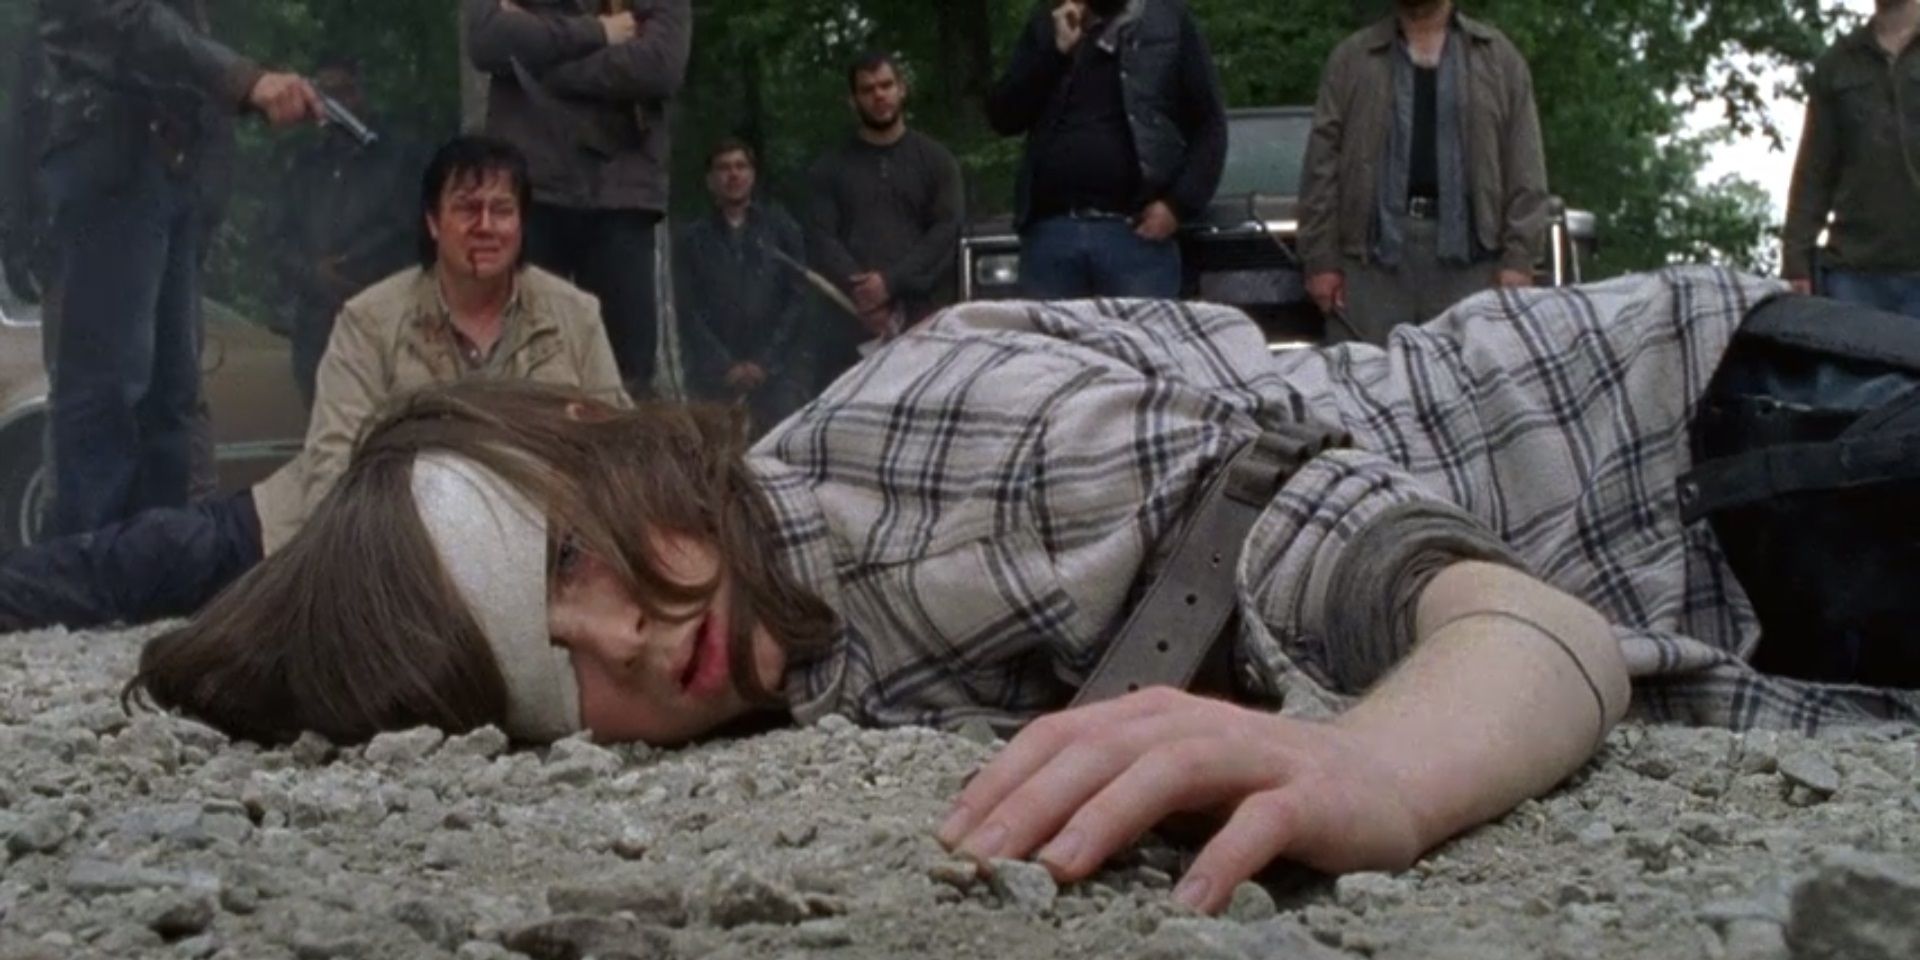 Carl Grimes is about to have his arm cut off in The Walking Dead Premiere